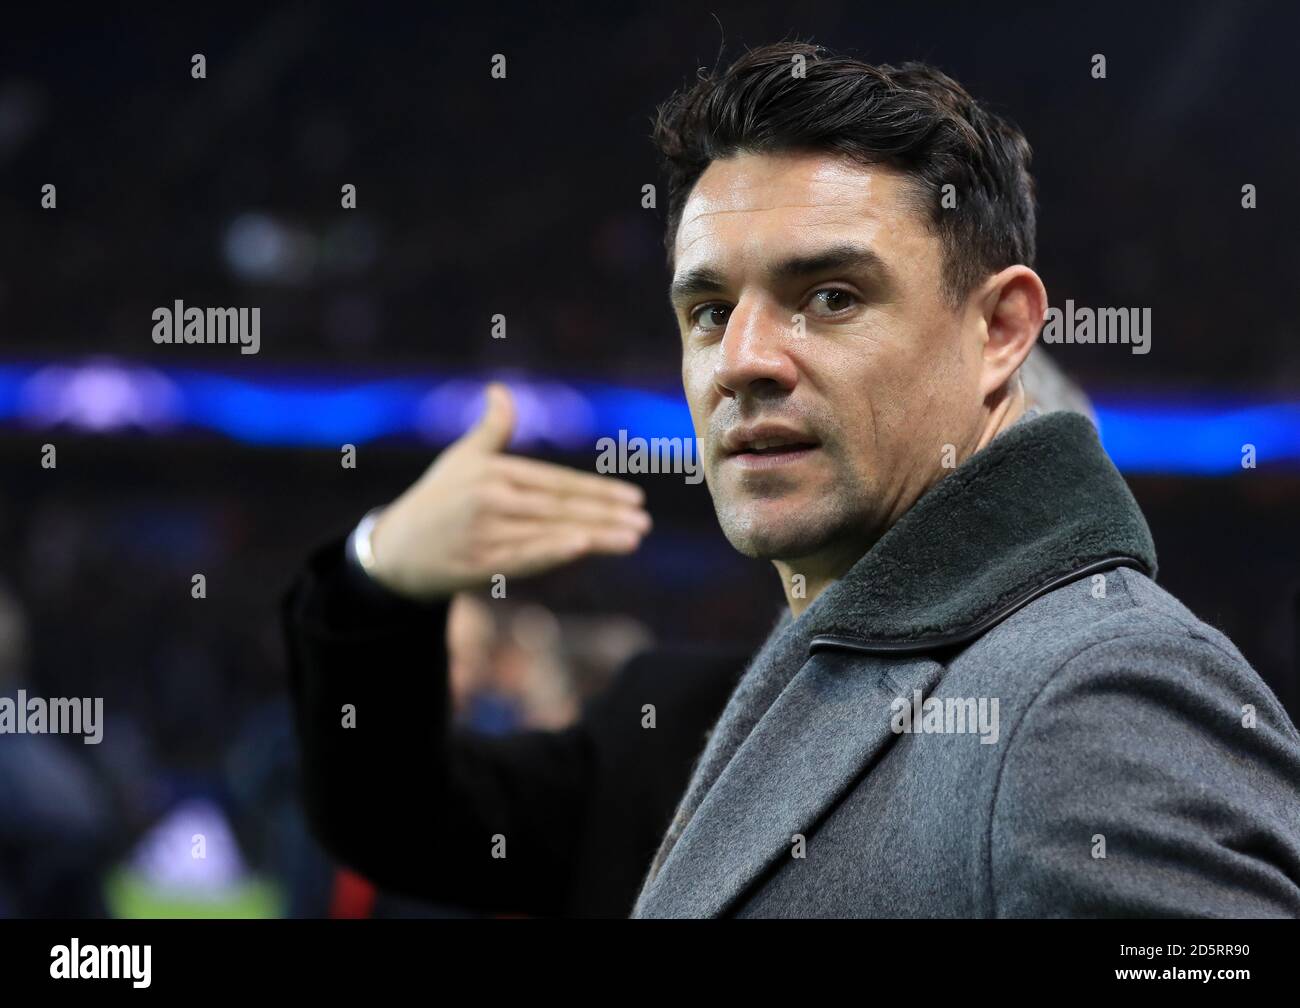 New Zealand rugby union player Dan Carter during the match between Paris Saint-Germain and Barcelona Stock Photo